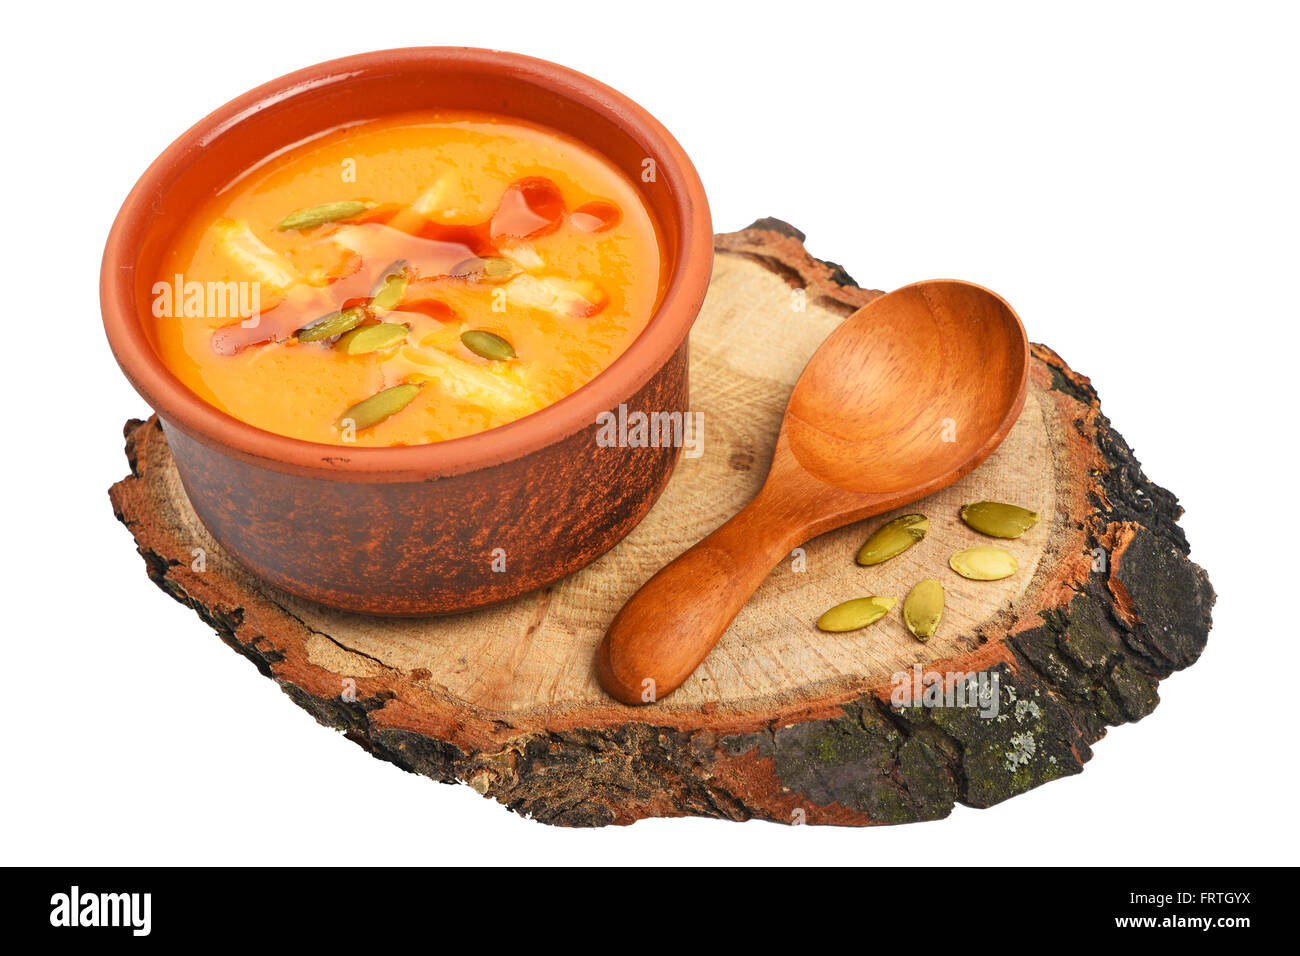 Small ceramic bowl of pumpkin cream soup, wooden spoon, slice of bread and seeds on wood cut isolated on white background, high Stock Photo